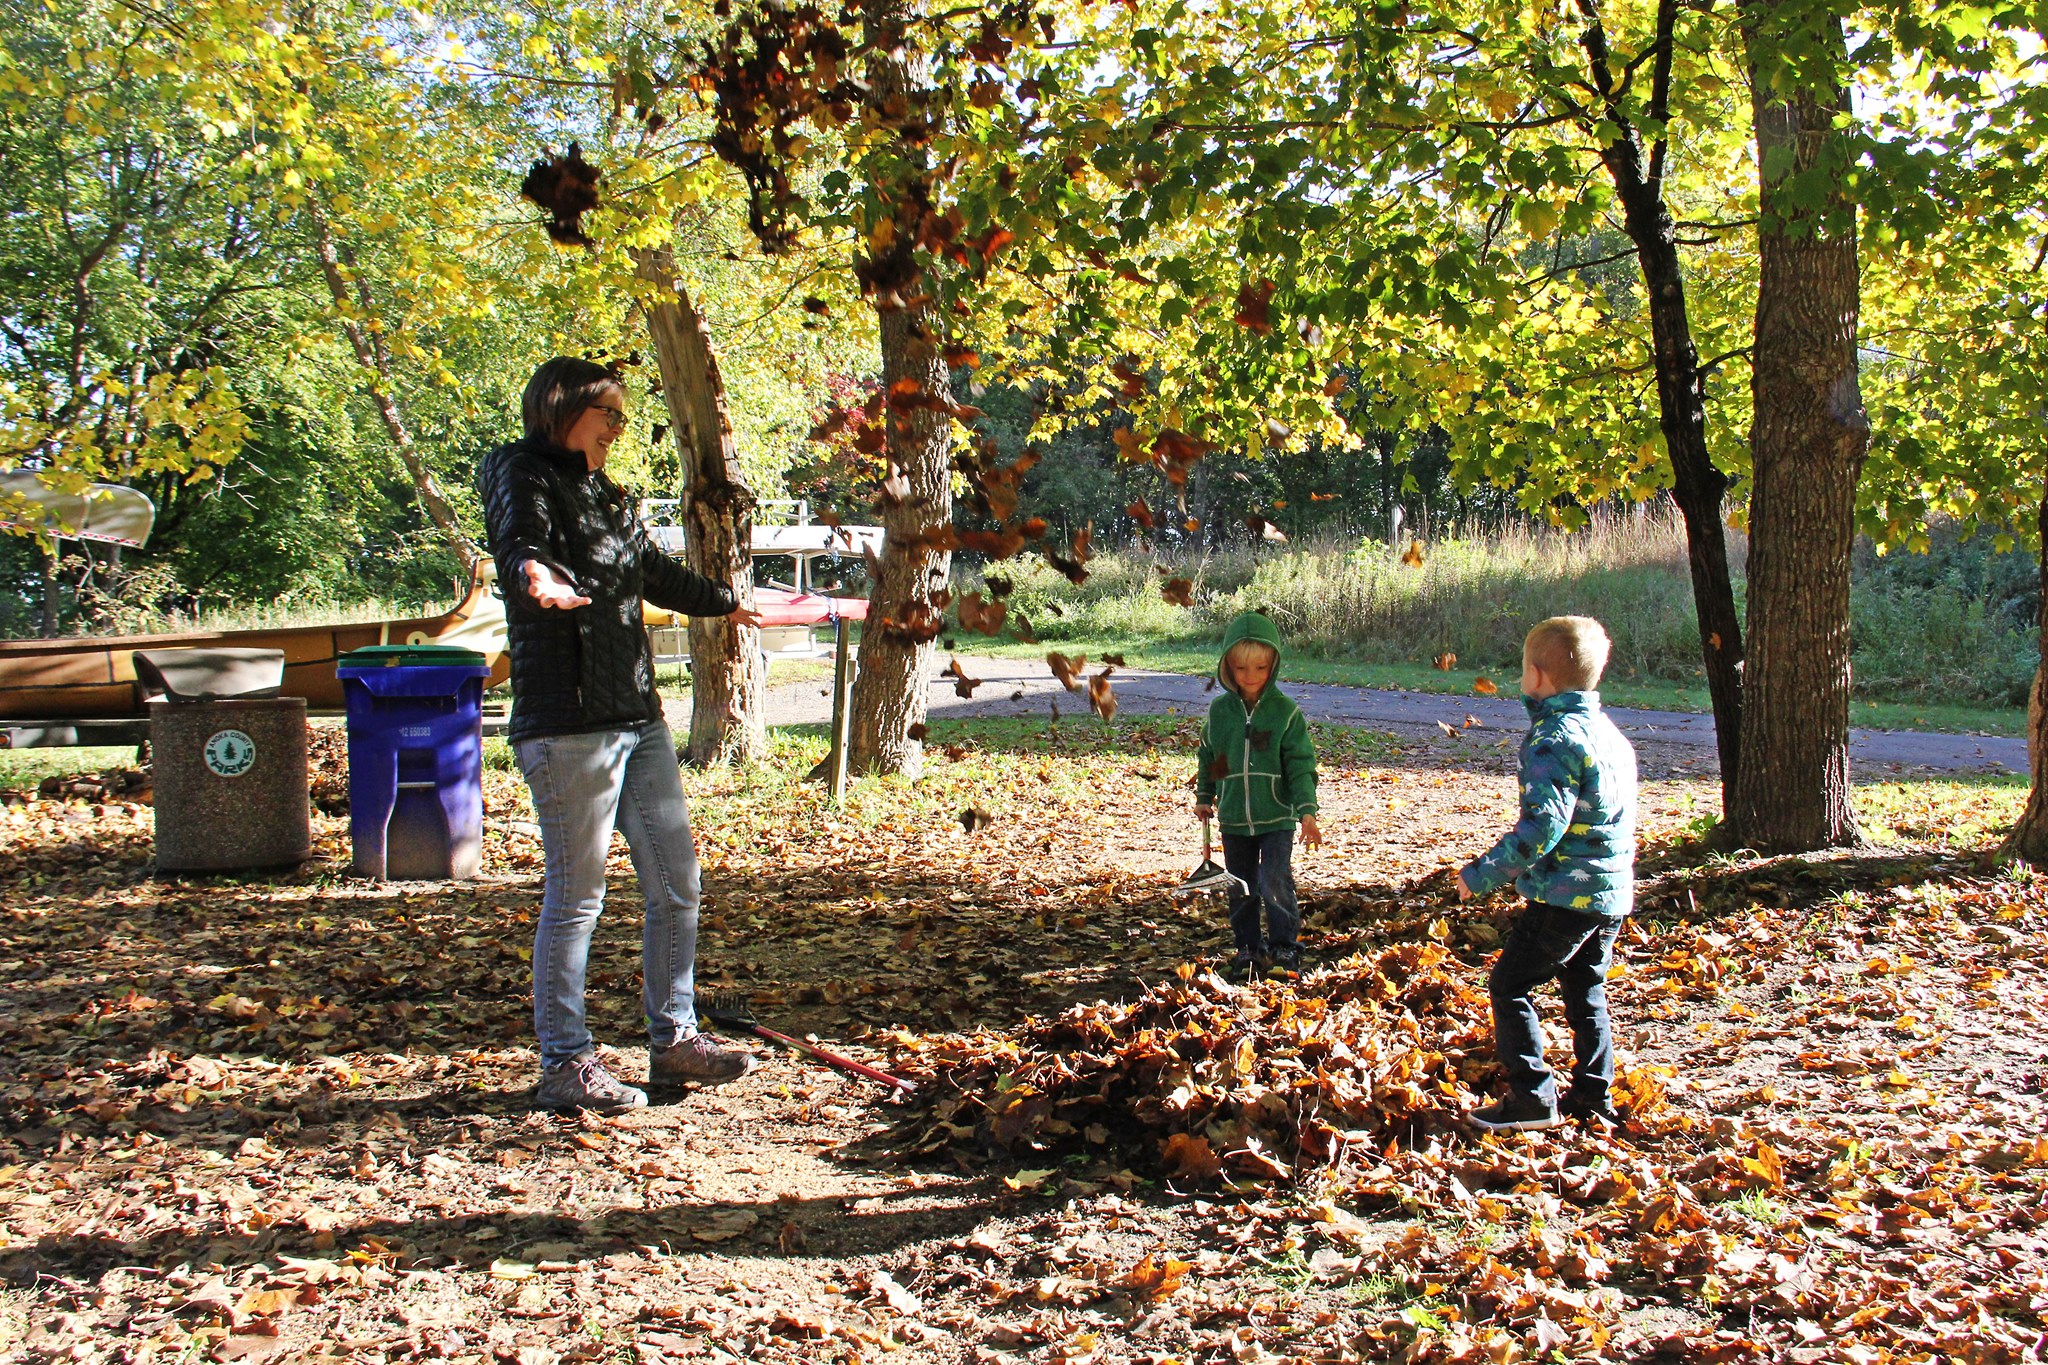 woman and children playing in leaves at Wargo nature center in autumn.